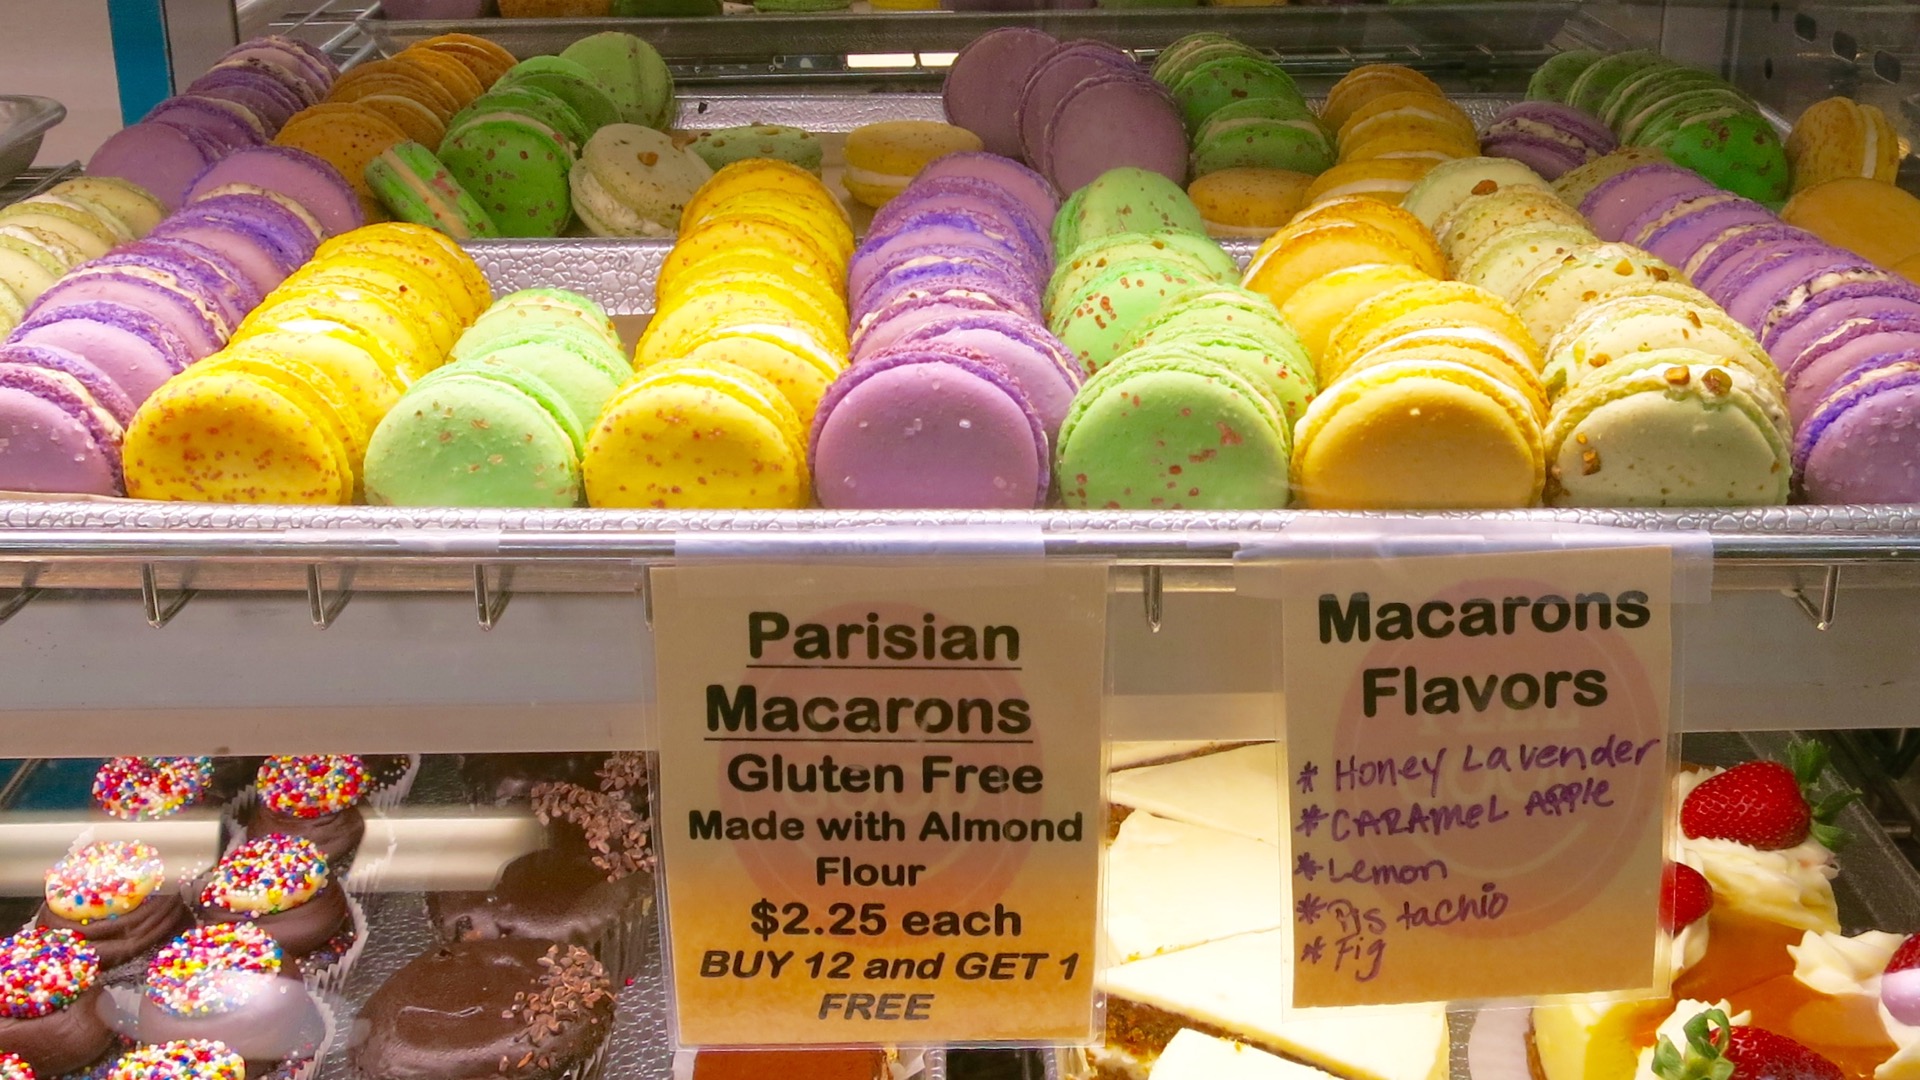 Feel Good Bakery touts the gluten-free ingredients of these almond flour-based desserts.